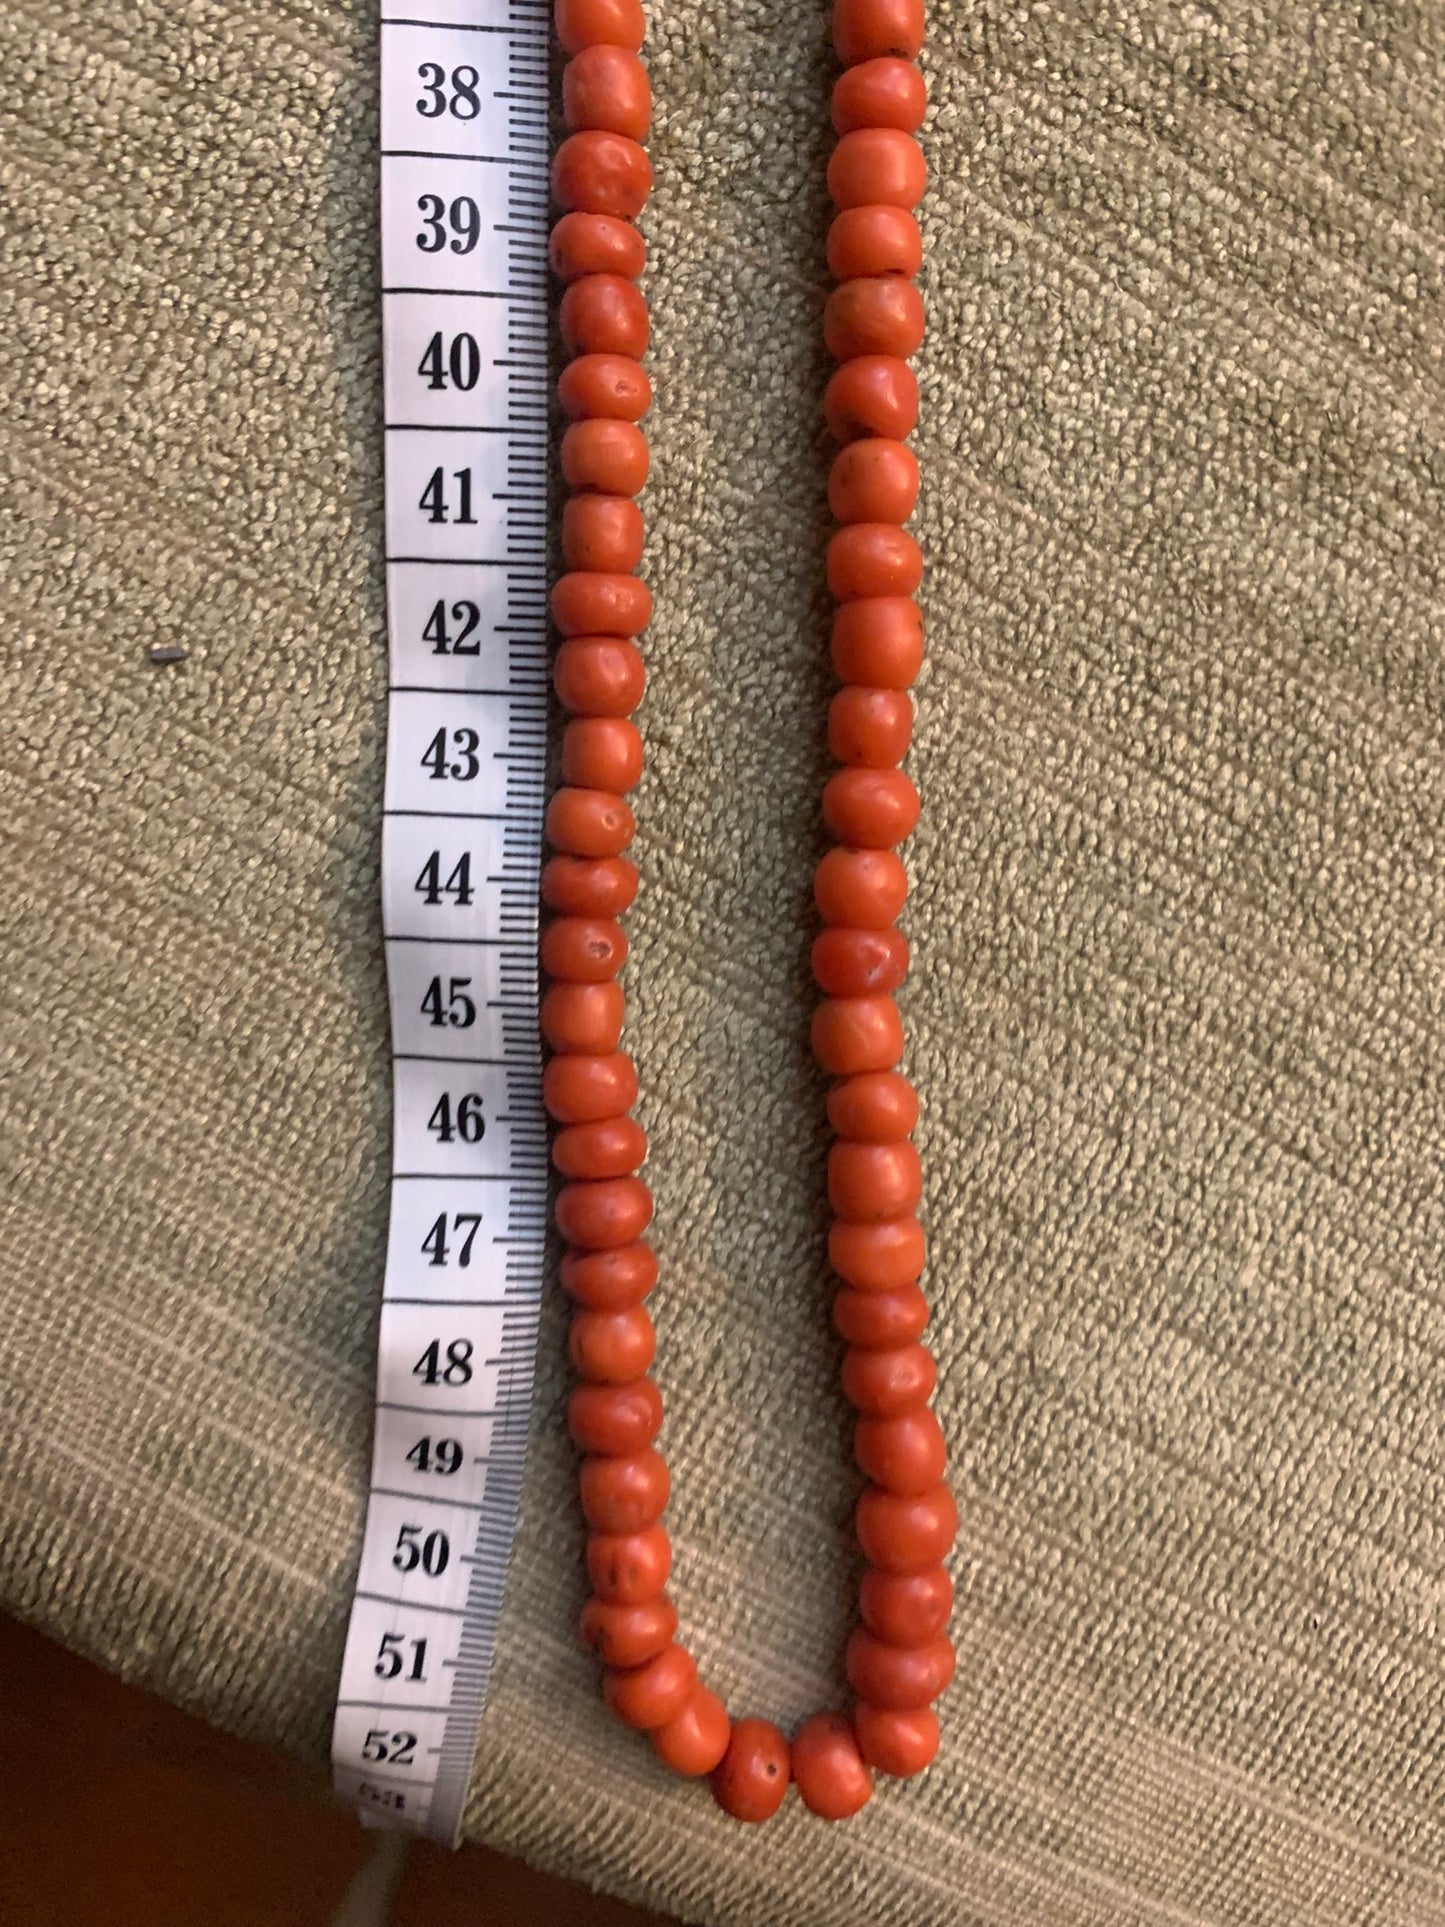 Italian coral necklace.  Early 20th century